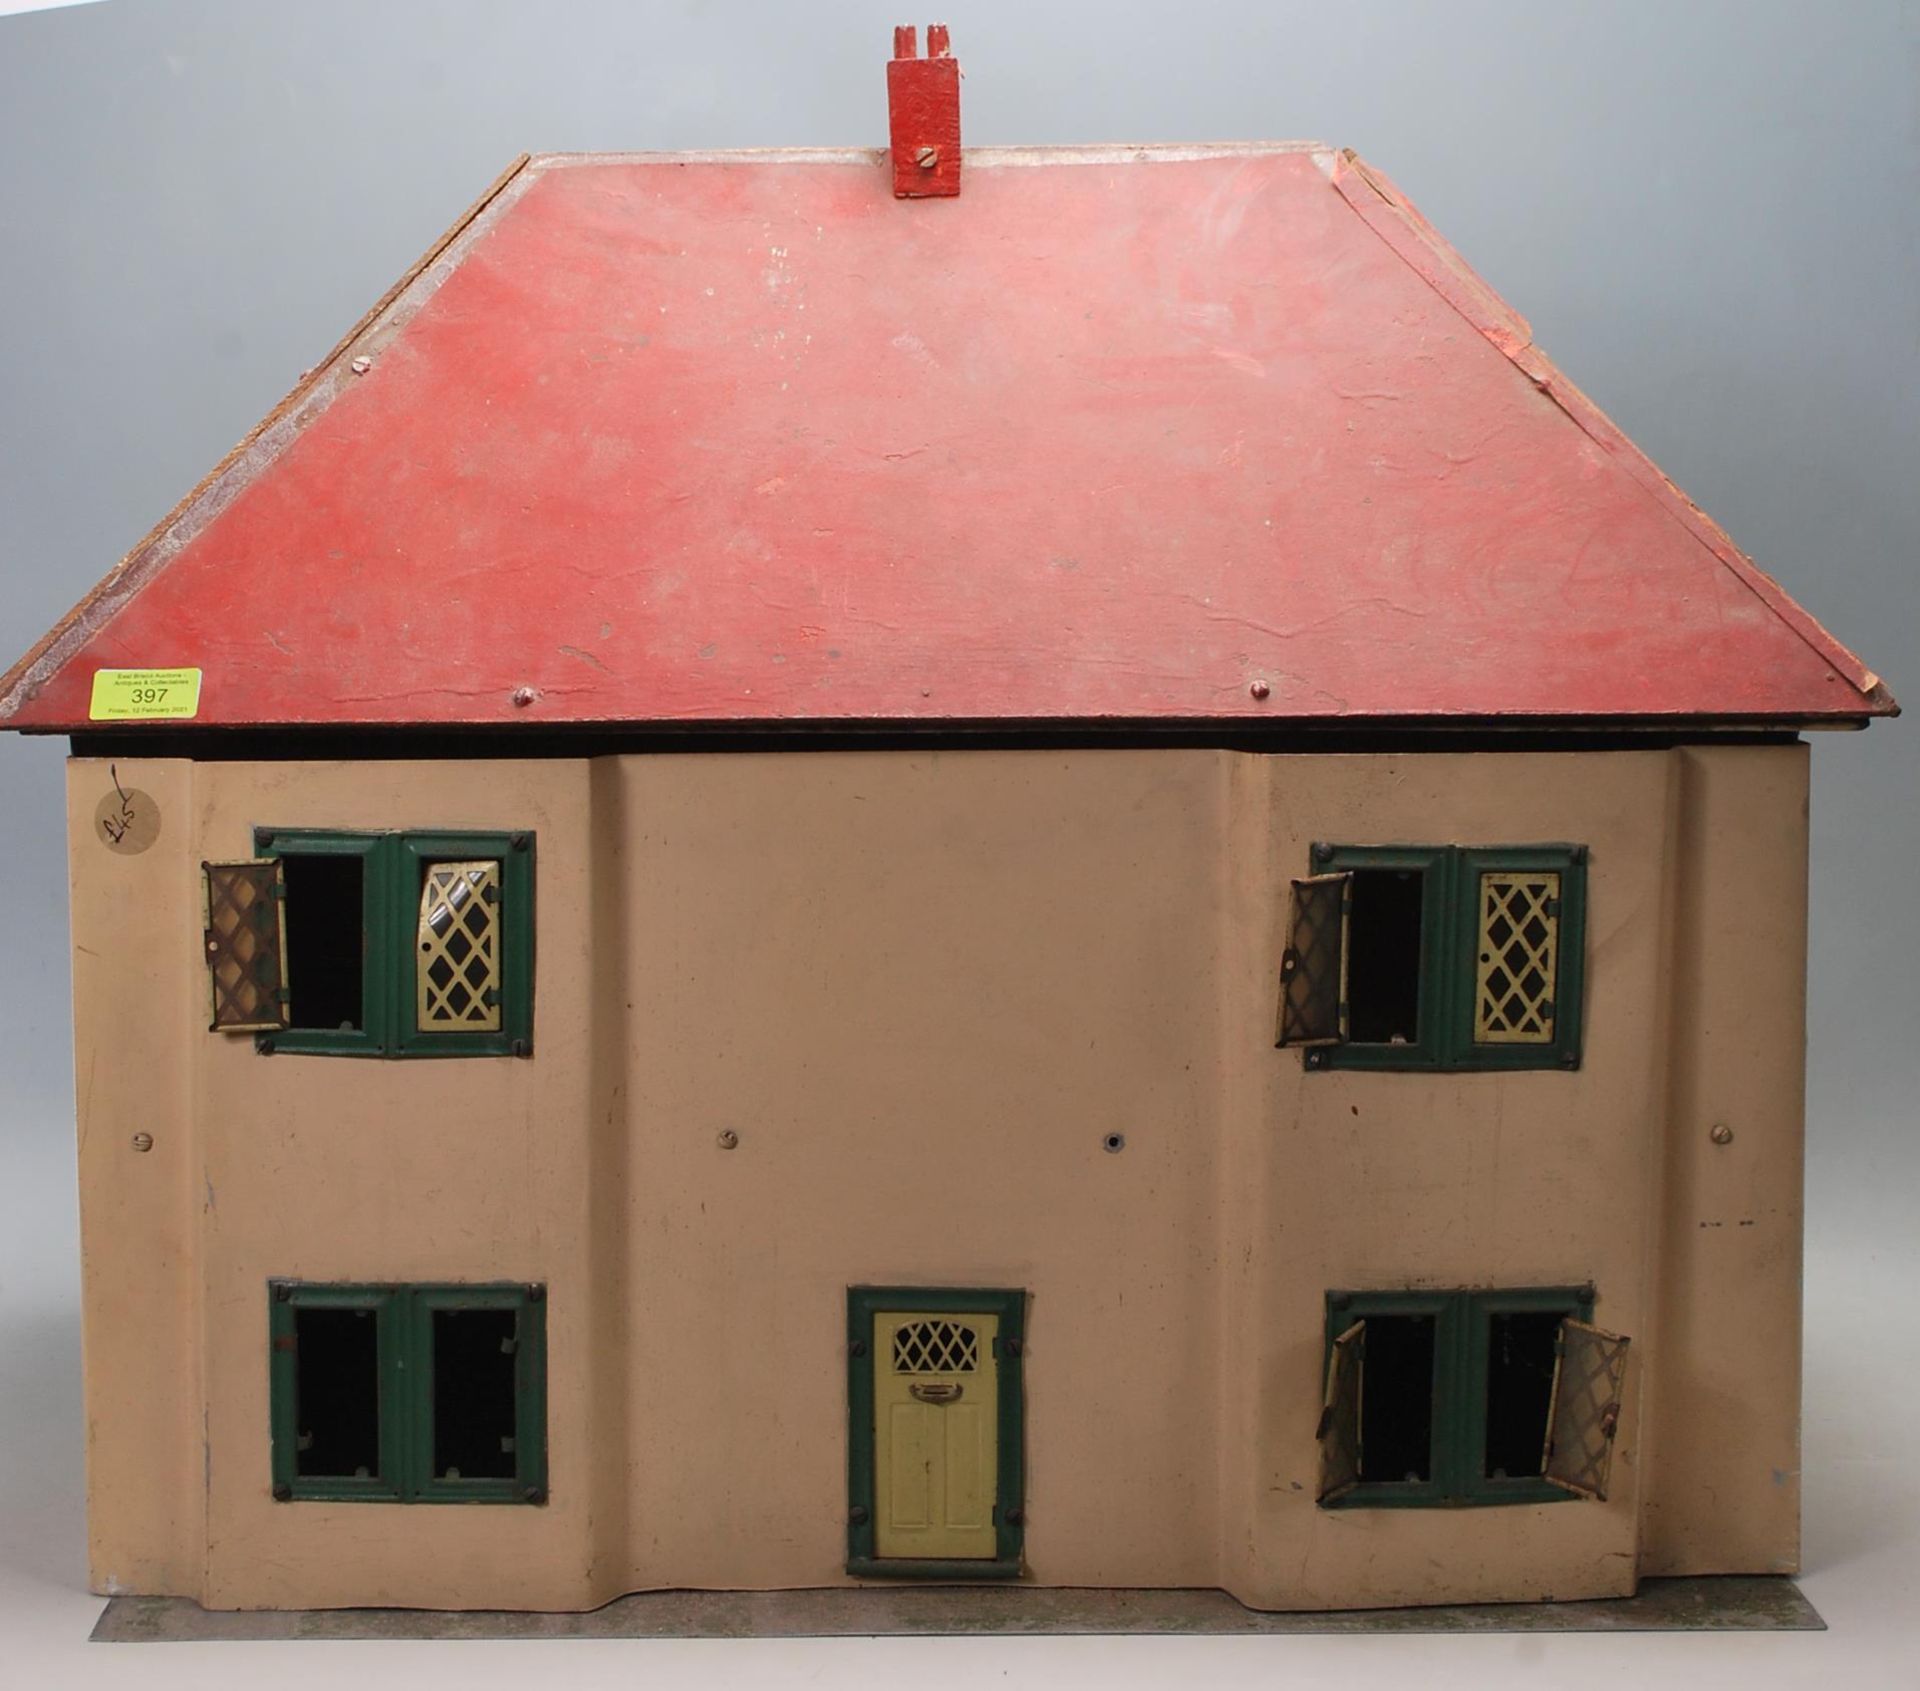 1950’S RETRO TOY DOLLHOUSE WITH HINGED FRONT